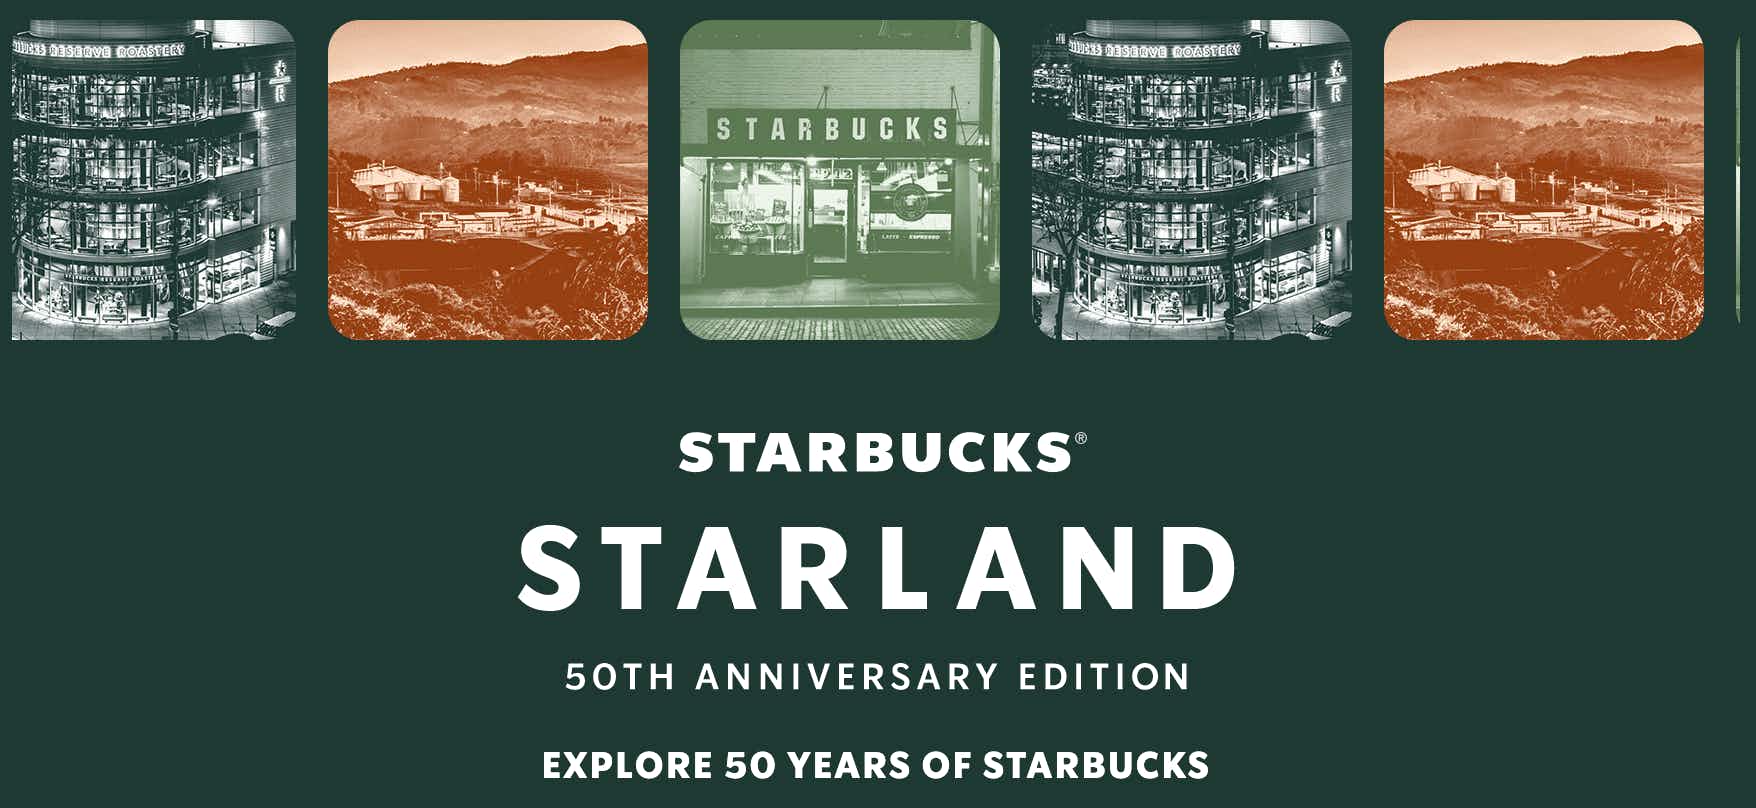 Starbucks Starland game home page